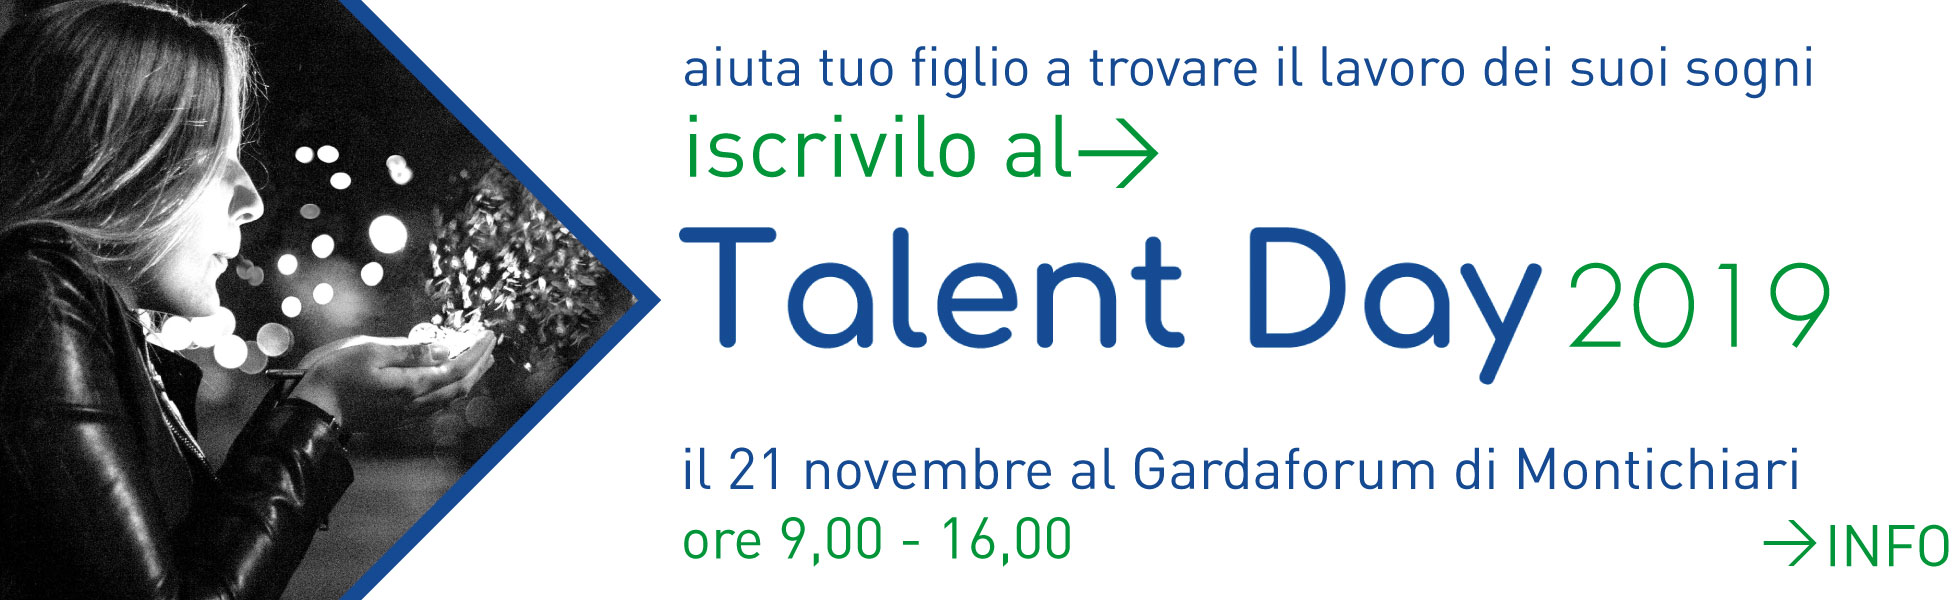 talent day 2019